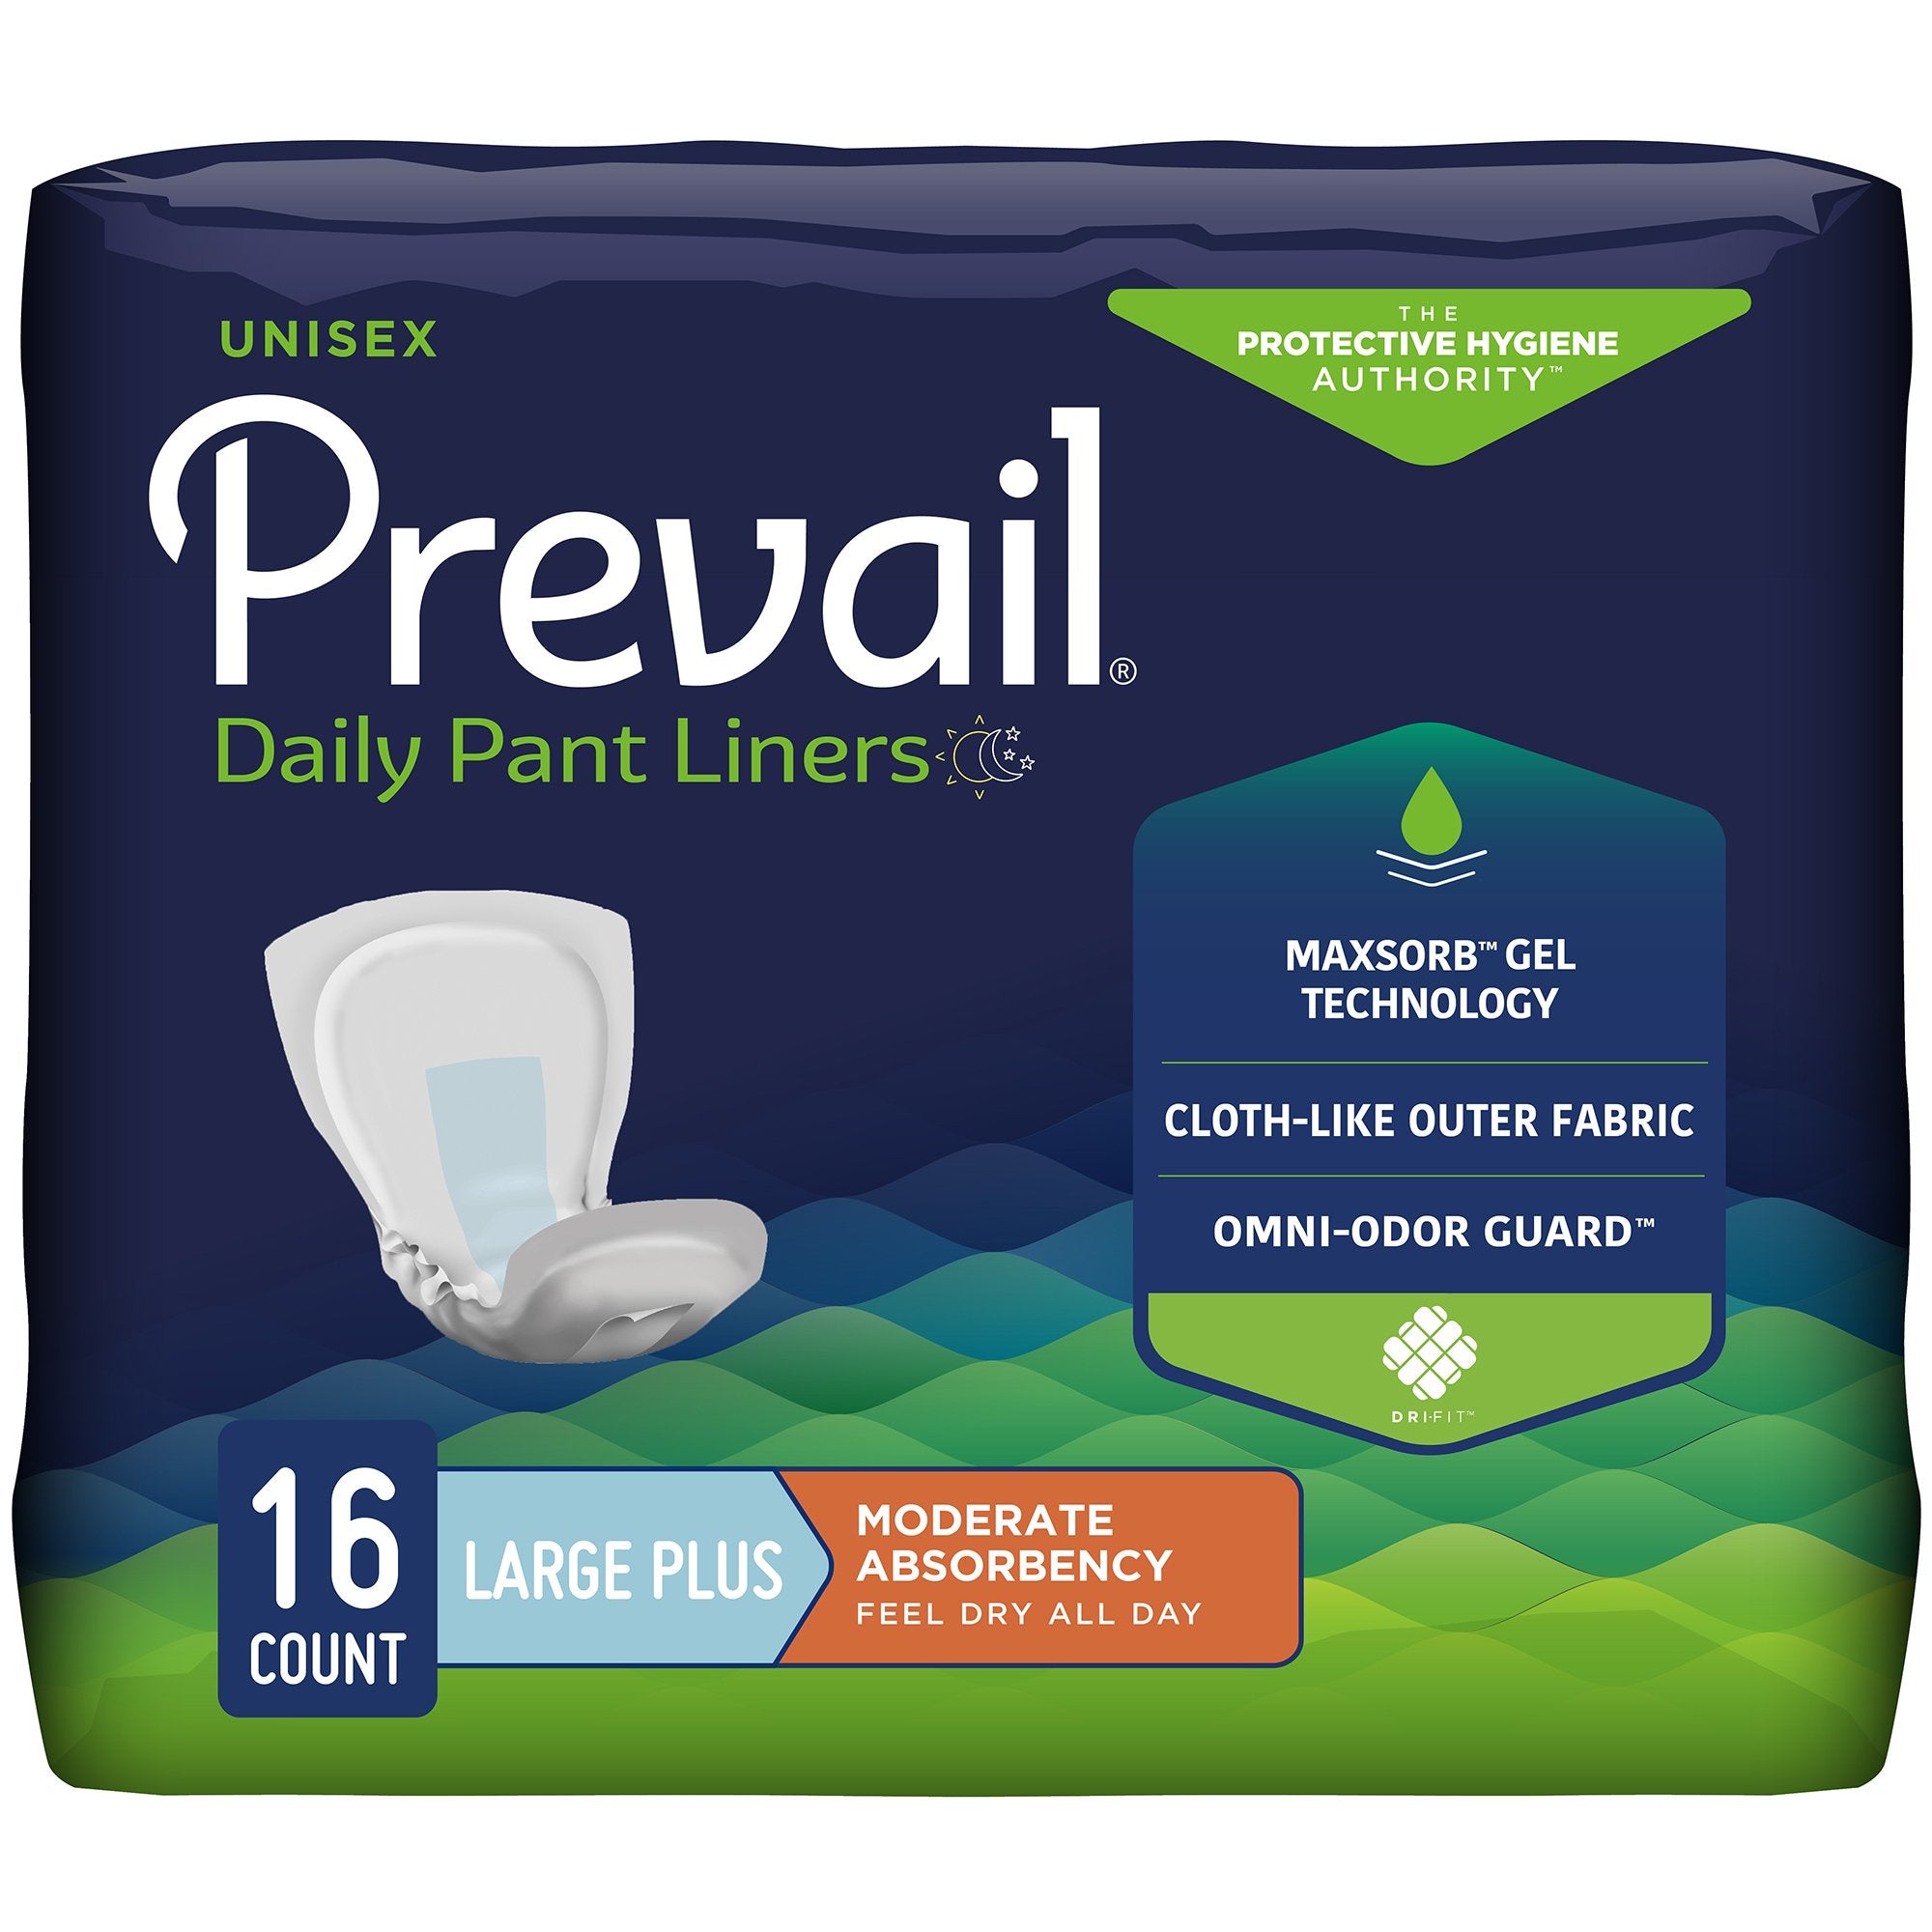 Bladder Control Pad Prevail Daily Pant Liners 28 Inch Length Moderate Absorbency Polymer Core Large Plus